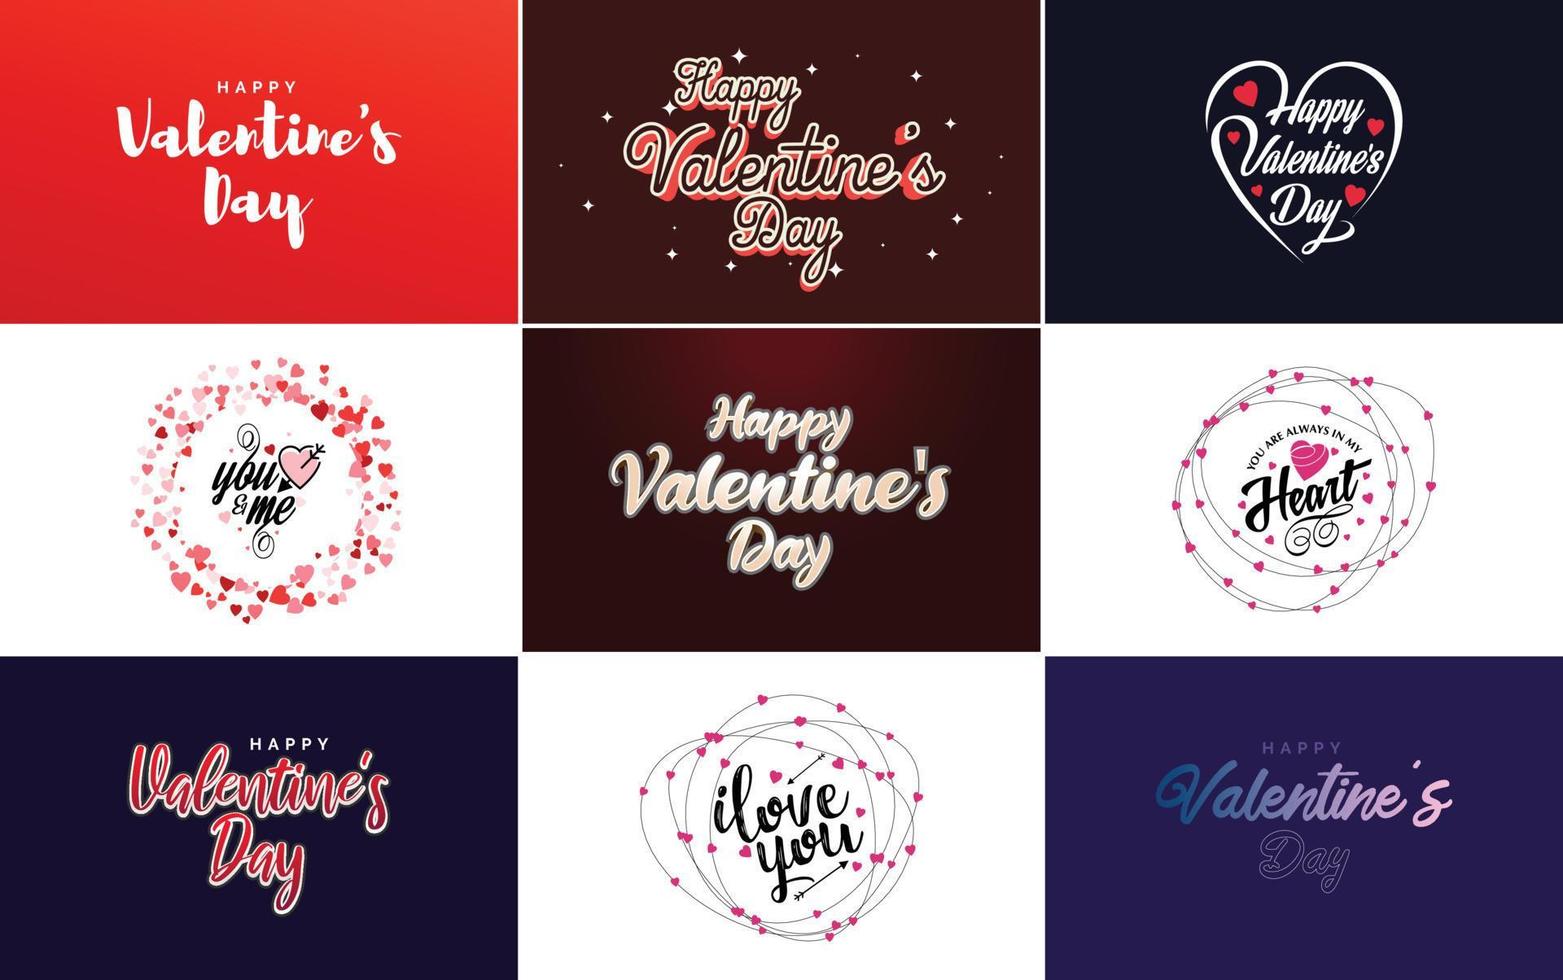 Love hand-drawn lettering with a heart design. Suitable for use as a Valentine's Day greeting or in romantic designs vector